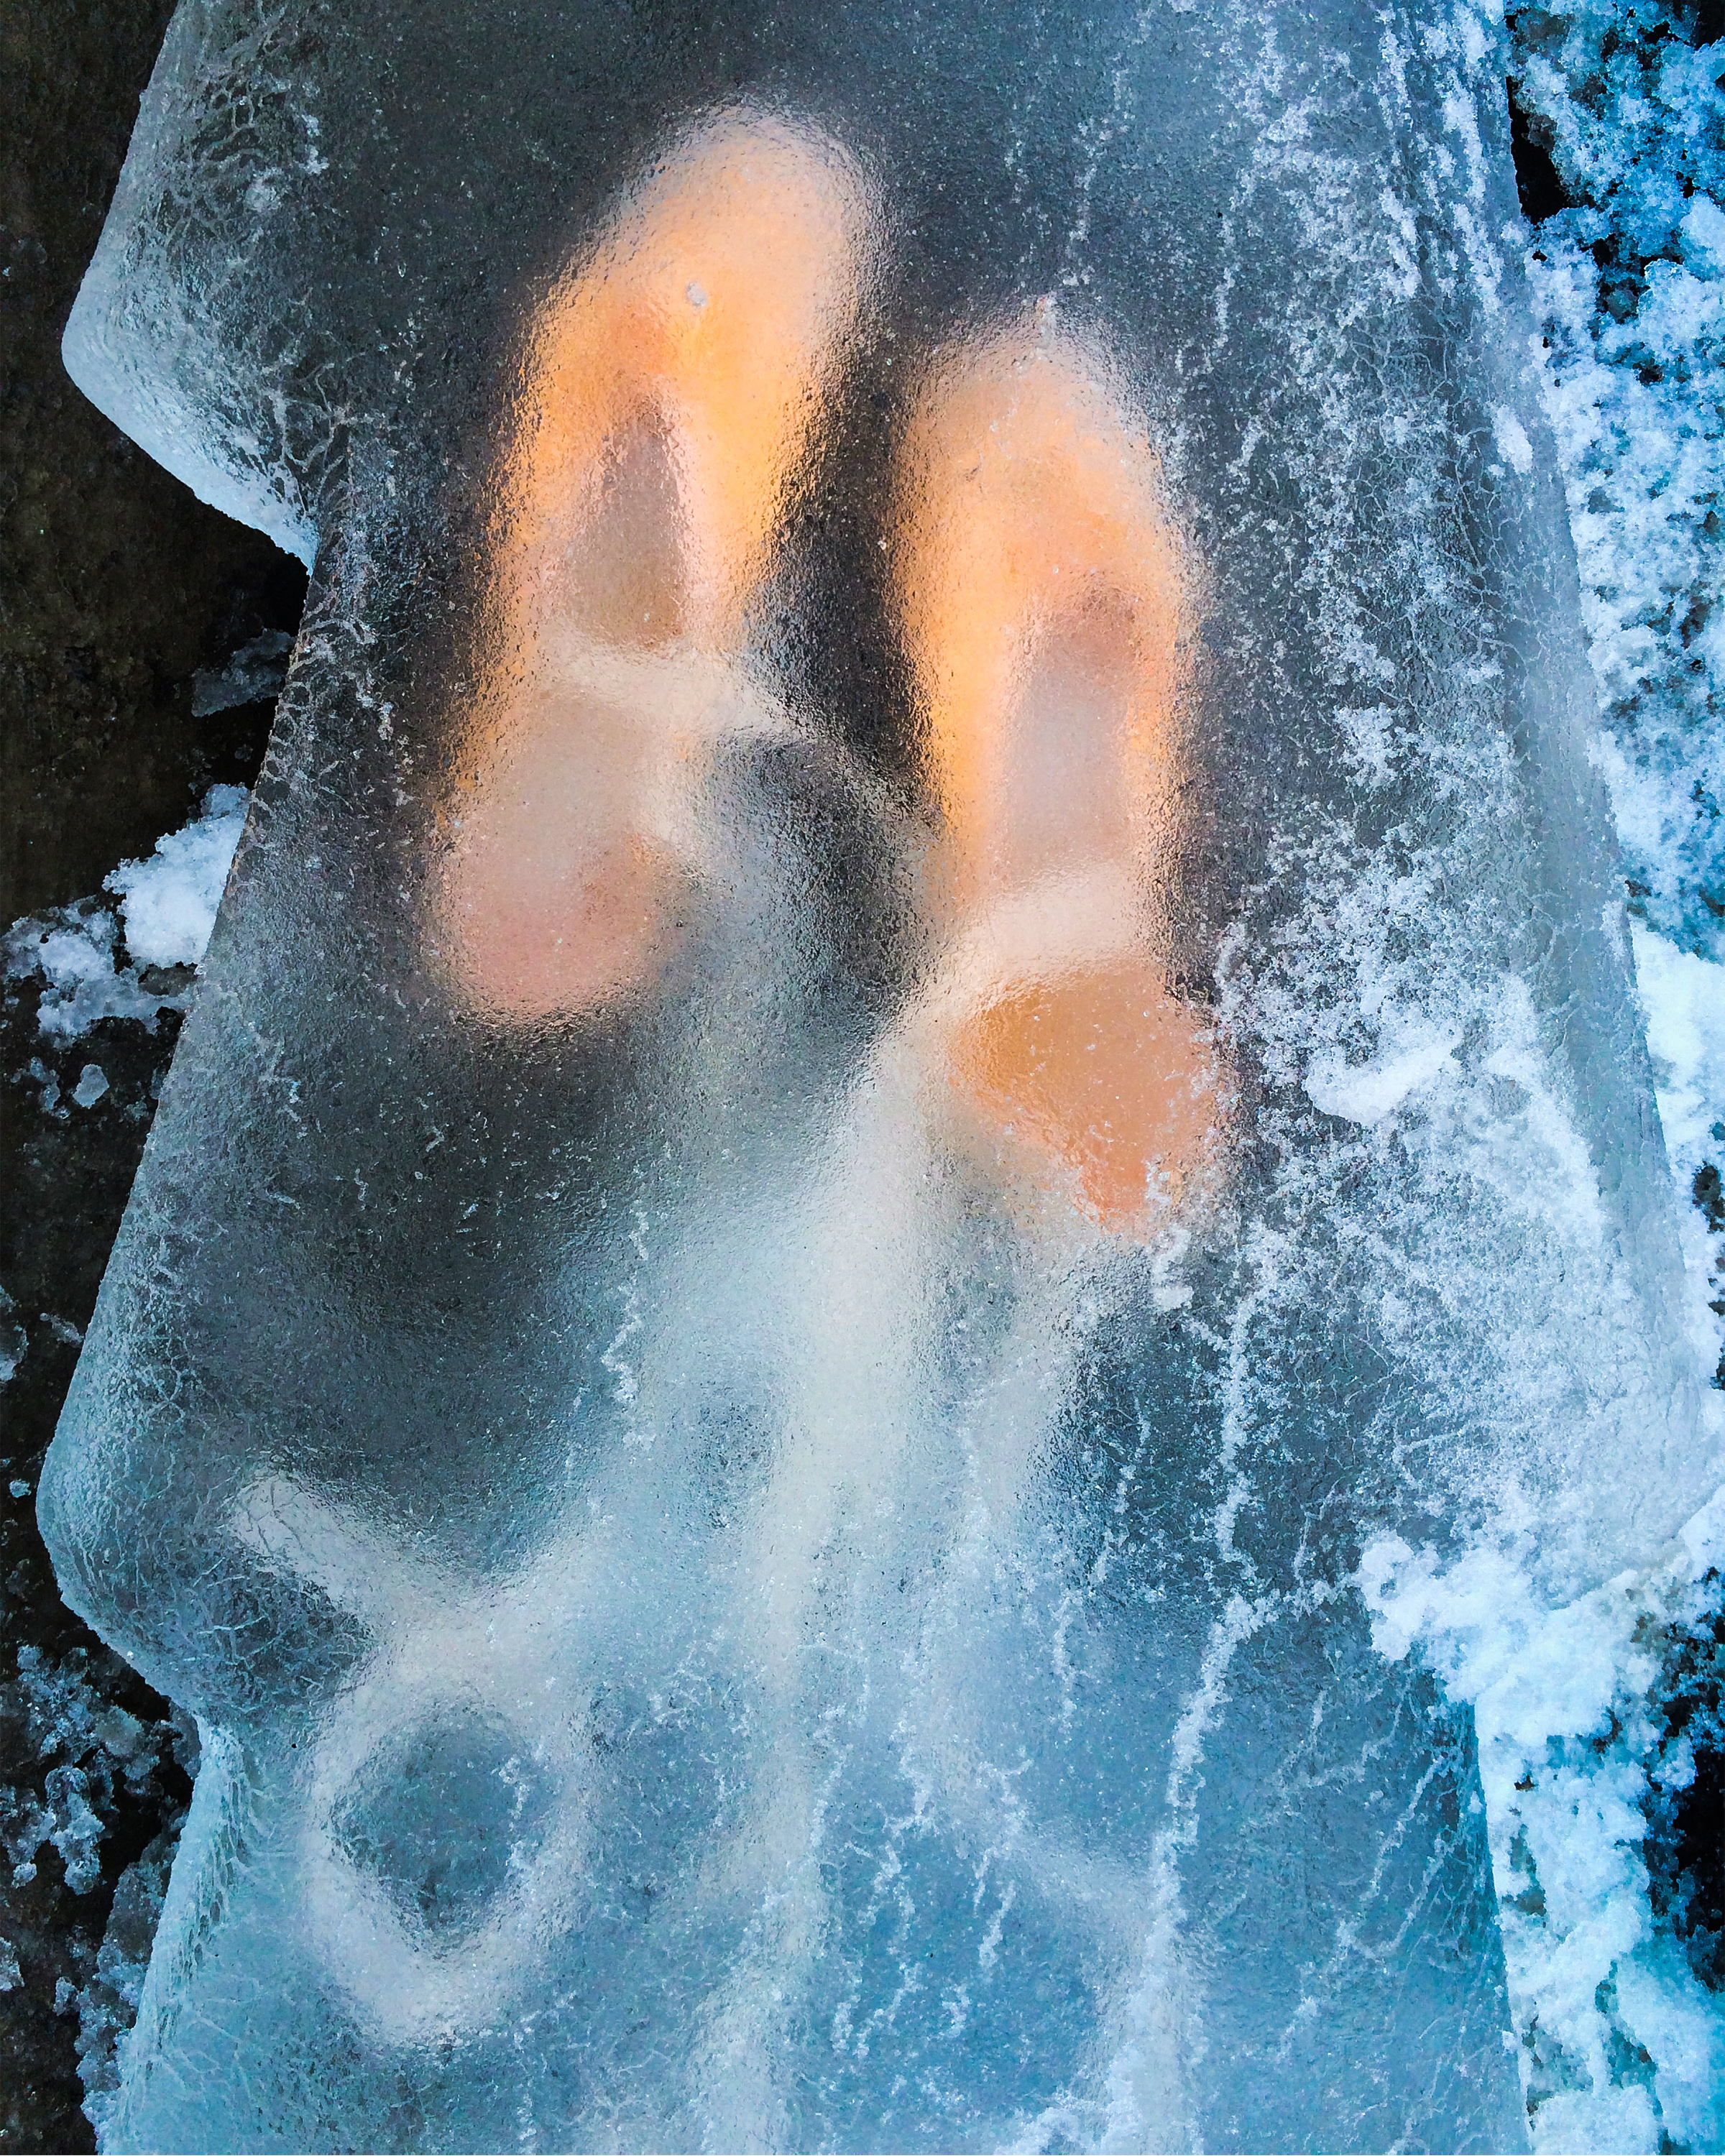 Ballet shoes frozen in ice in the streets of New York City.